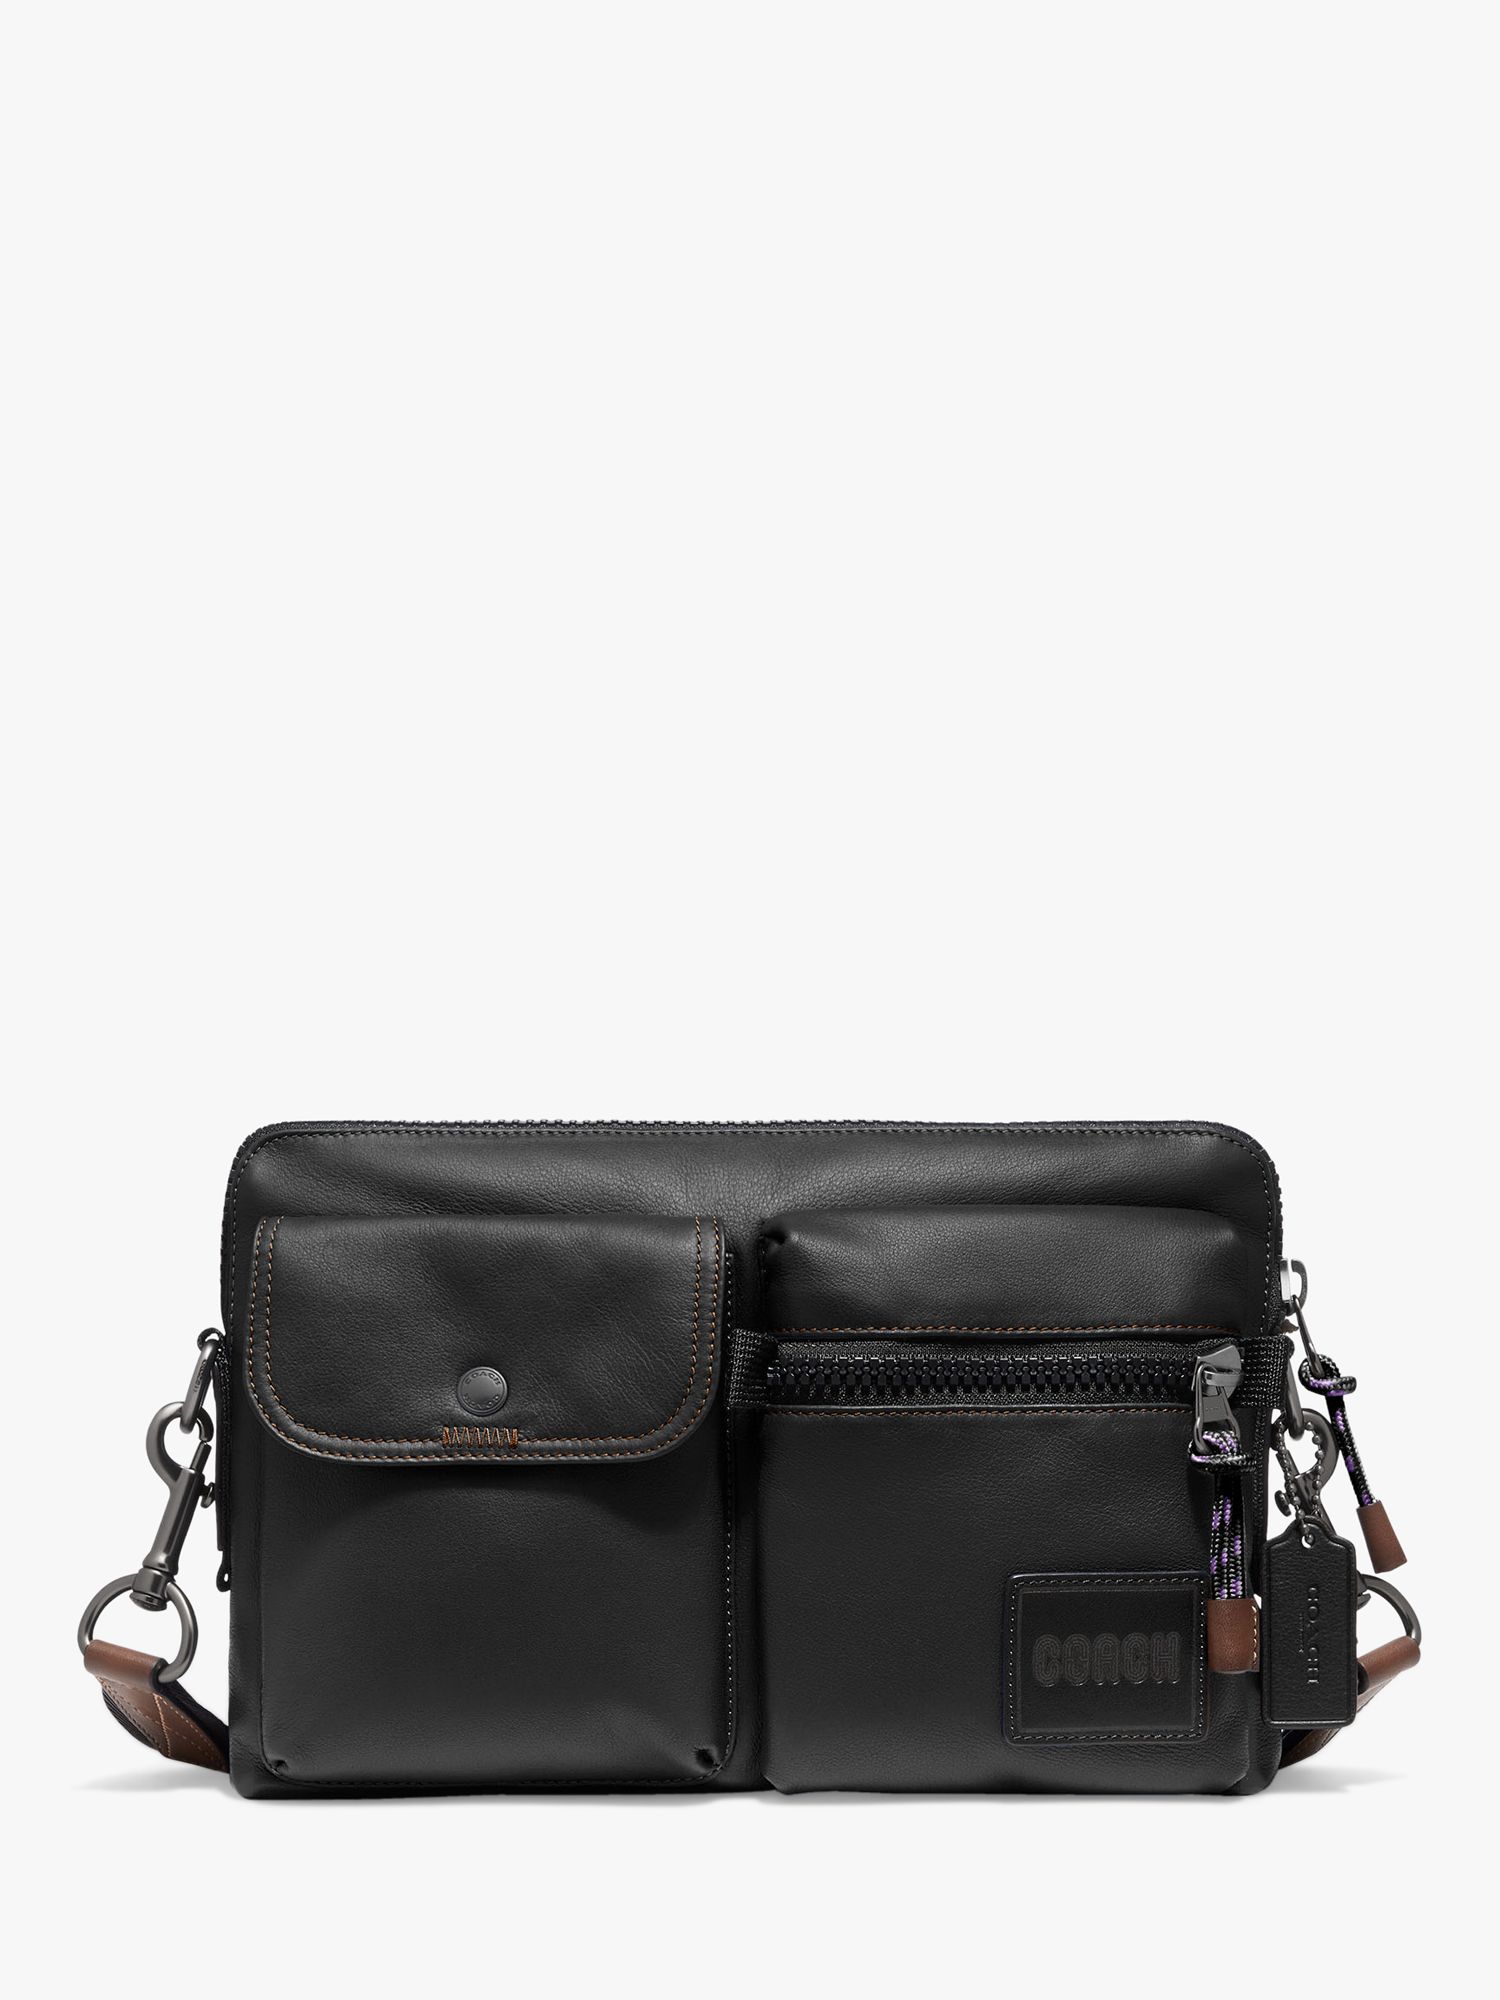 Coach Pacer Leather Cross Body Bag, Black at John Lewis & Partners